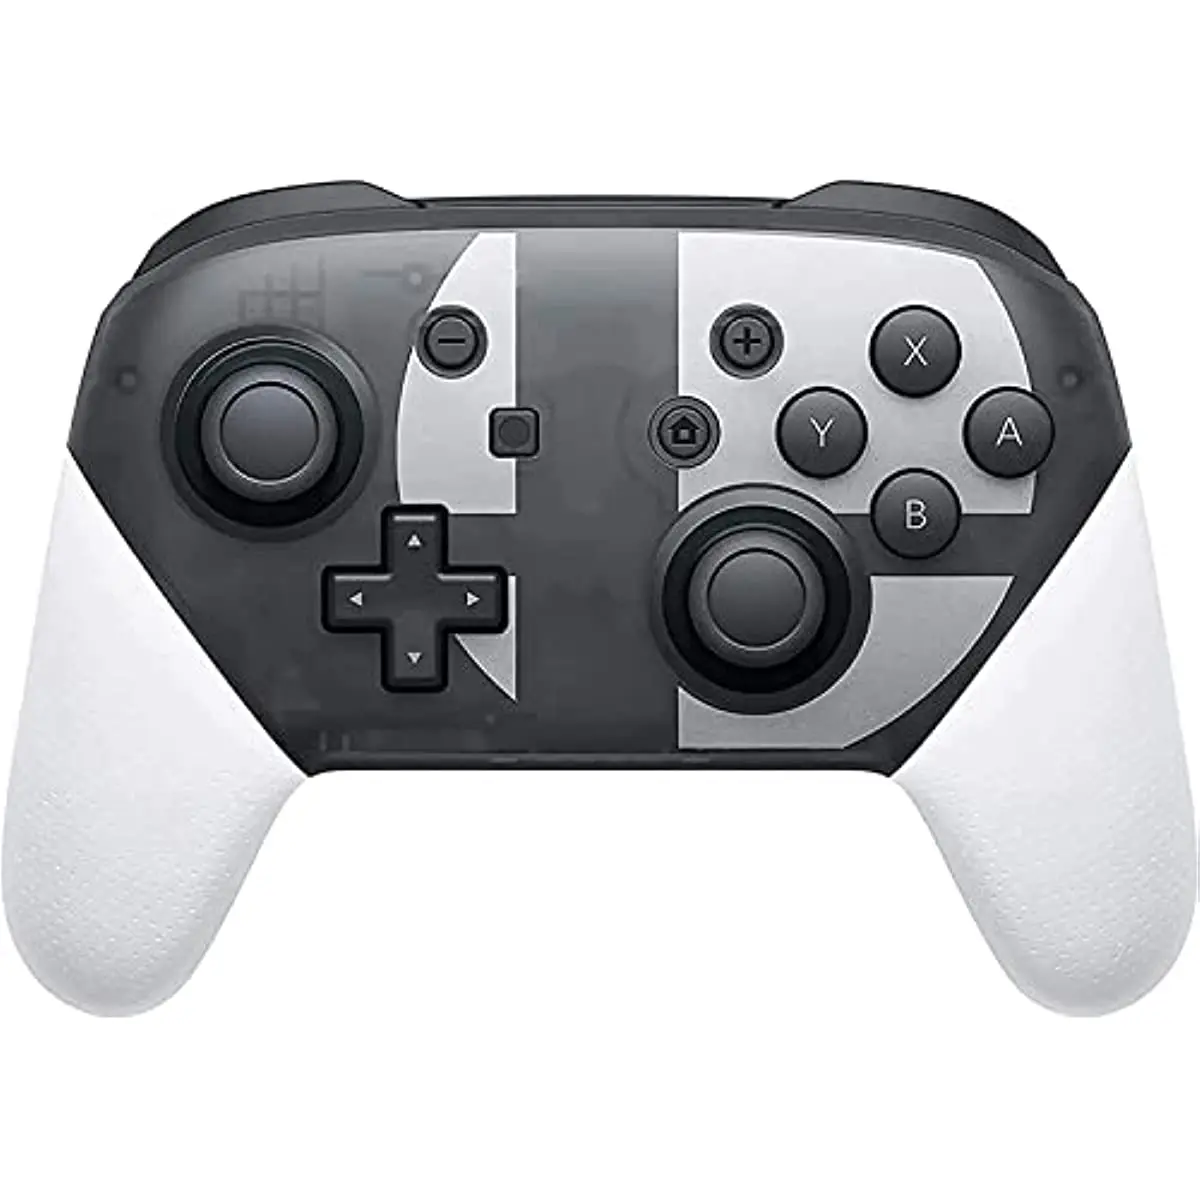 

Wireless Pro Controller Compatible with Switch Lite/OLED, Remote Gamepad Joystick with Double Vibration, Screenshot and Wake up